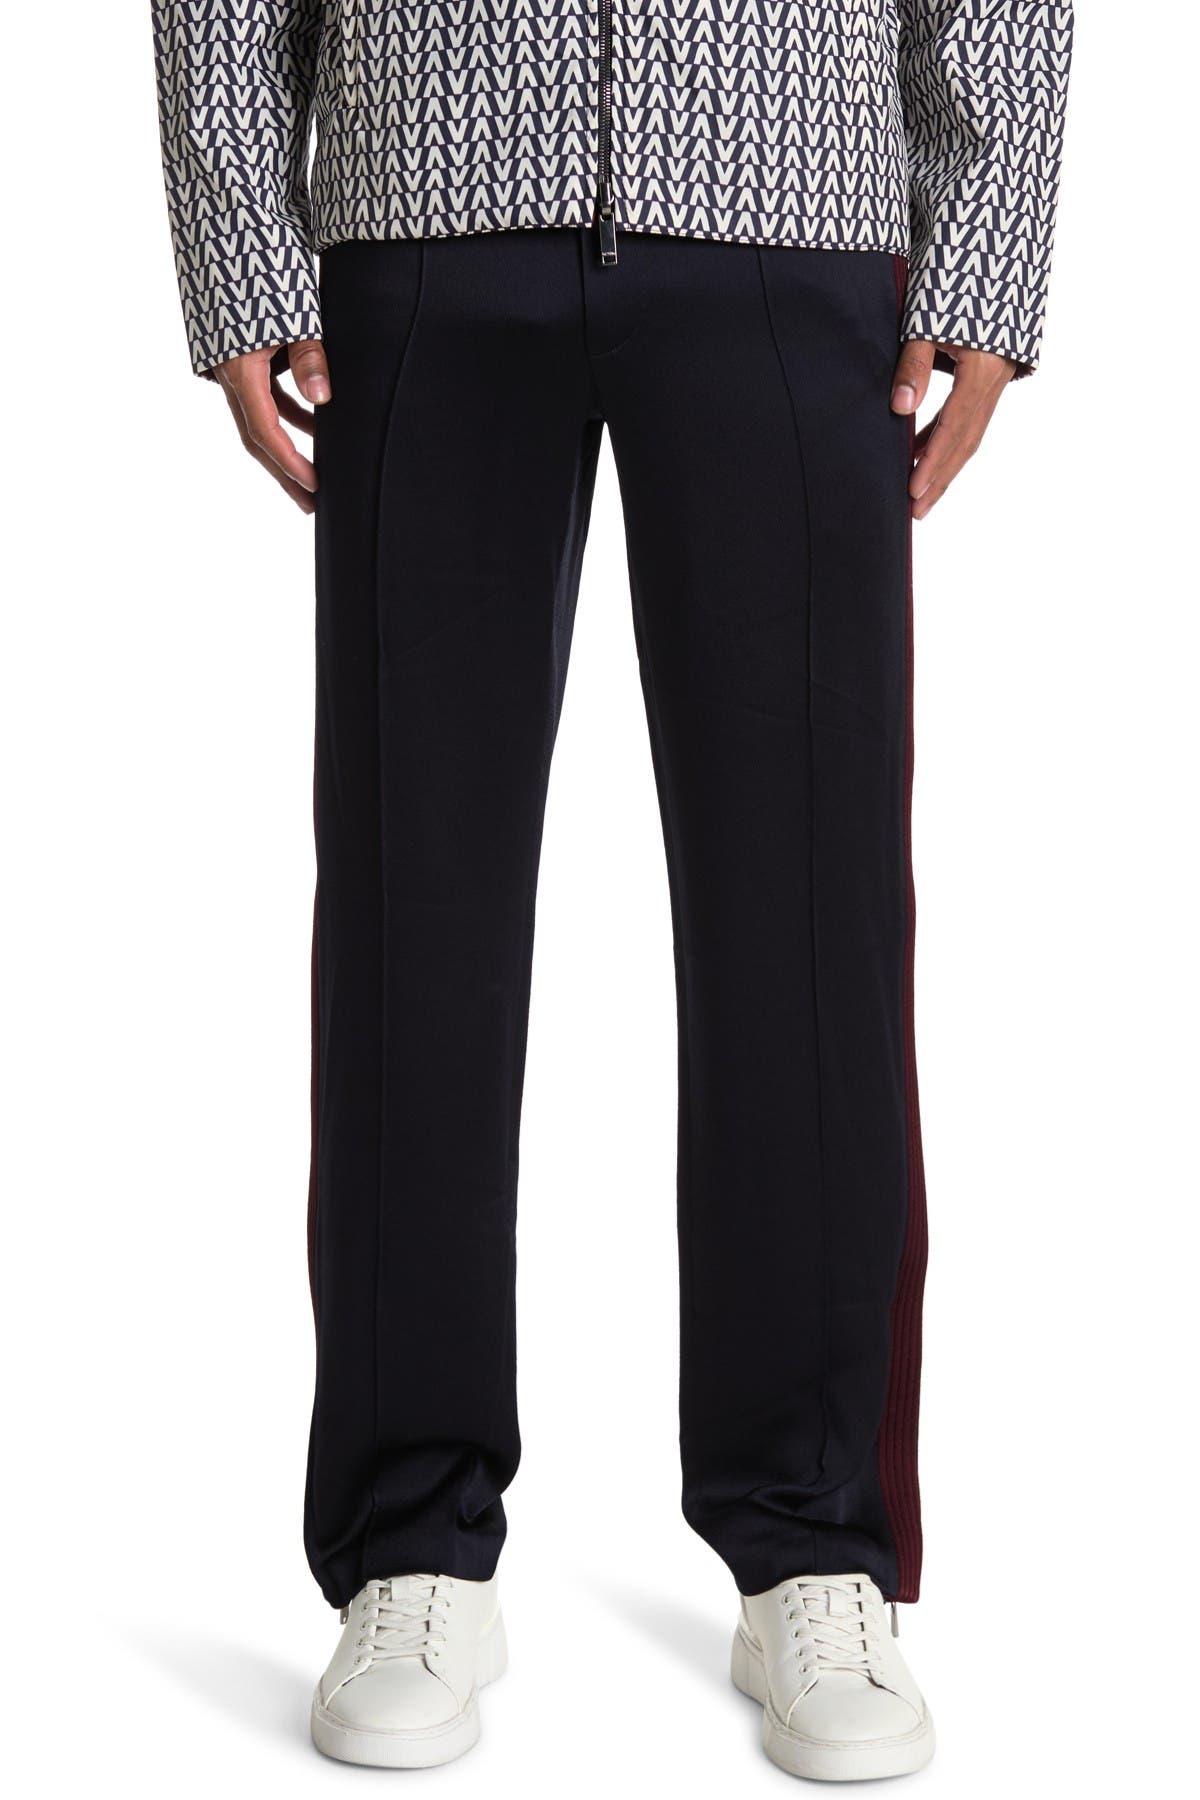 Valentino Side Stripe Pull-on Pants In Navy/bordeaux